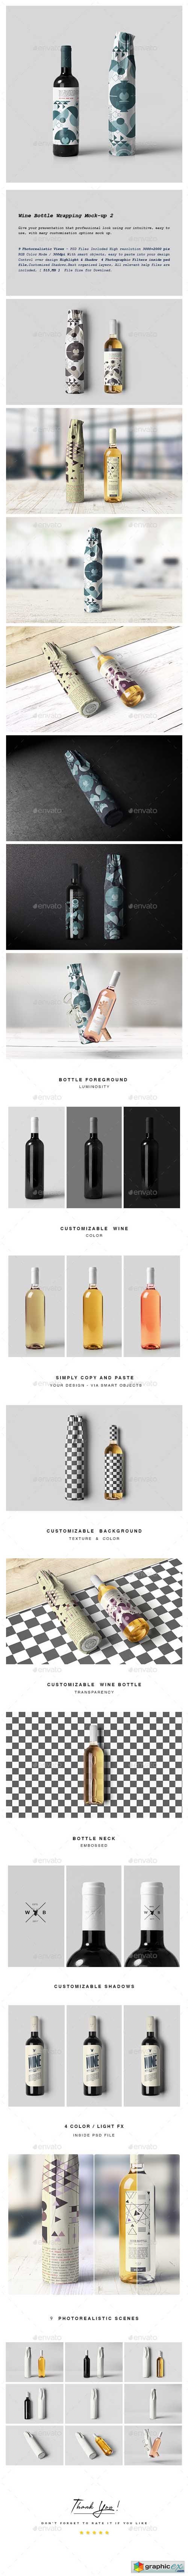 Wine Bottle Wrapping Mock-up 2